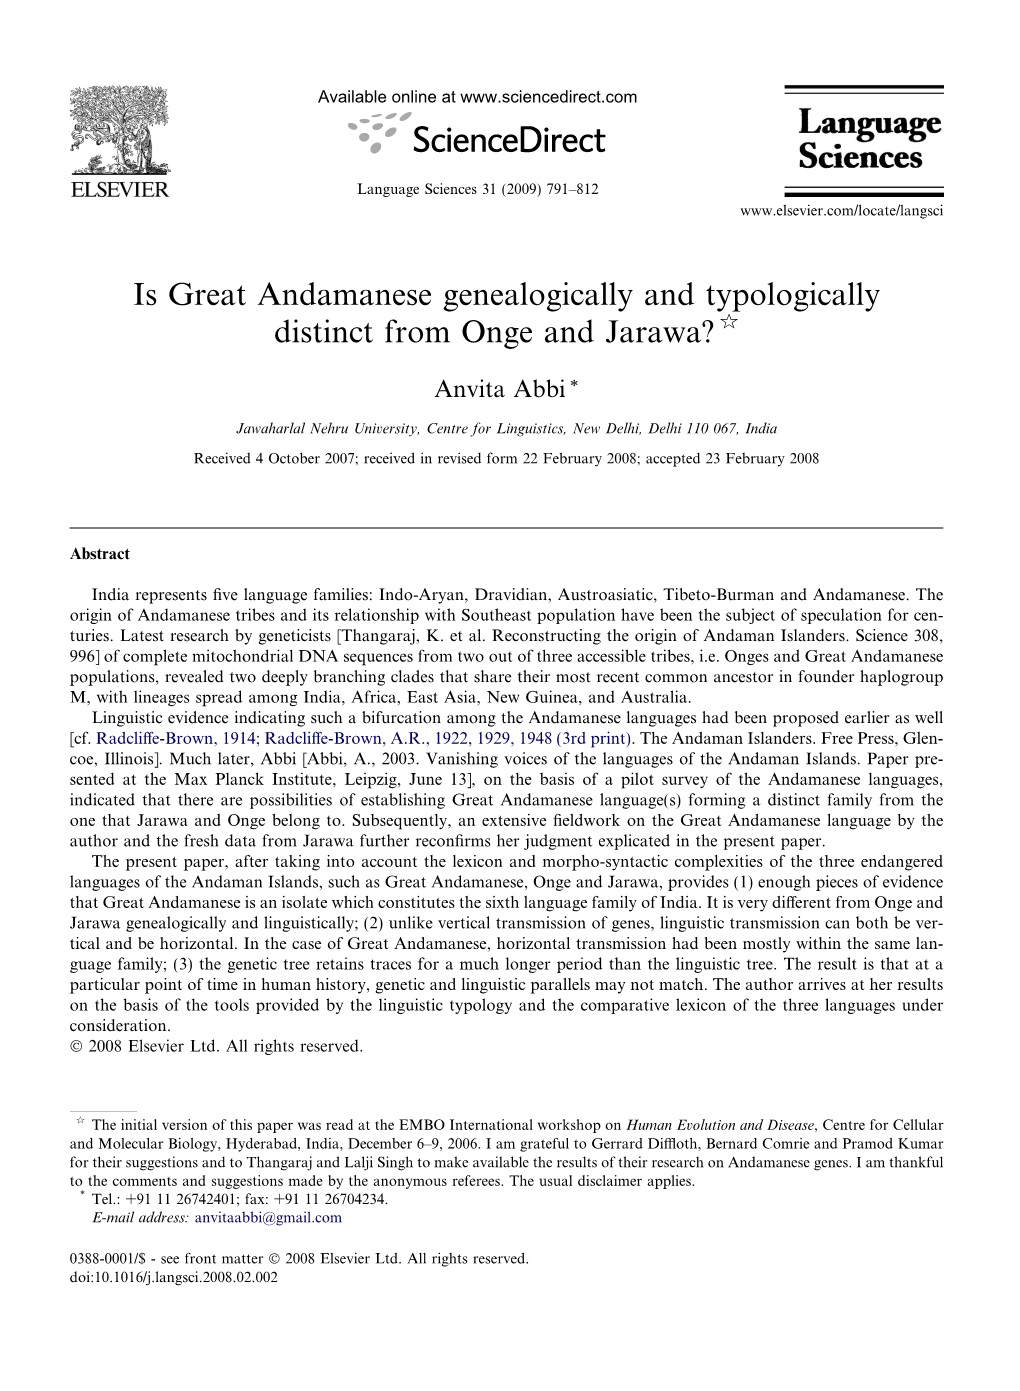 Is Great Andamanese Genealogically and Typologically Distinct from Onge and Jarawa? Q